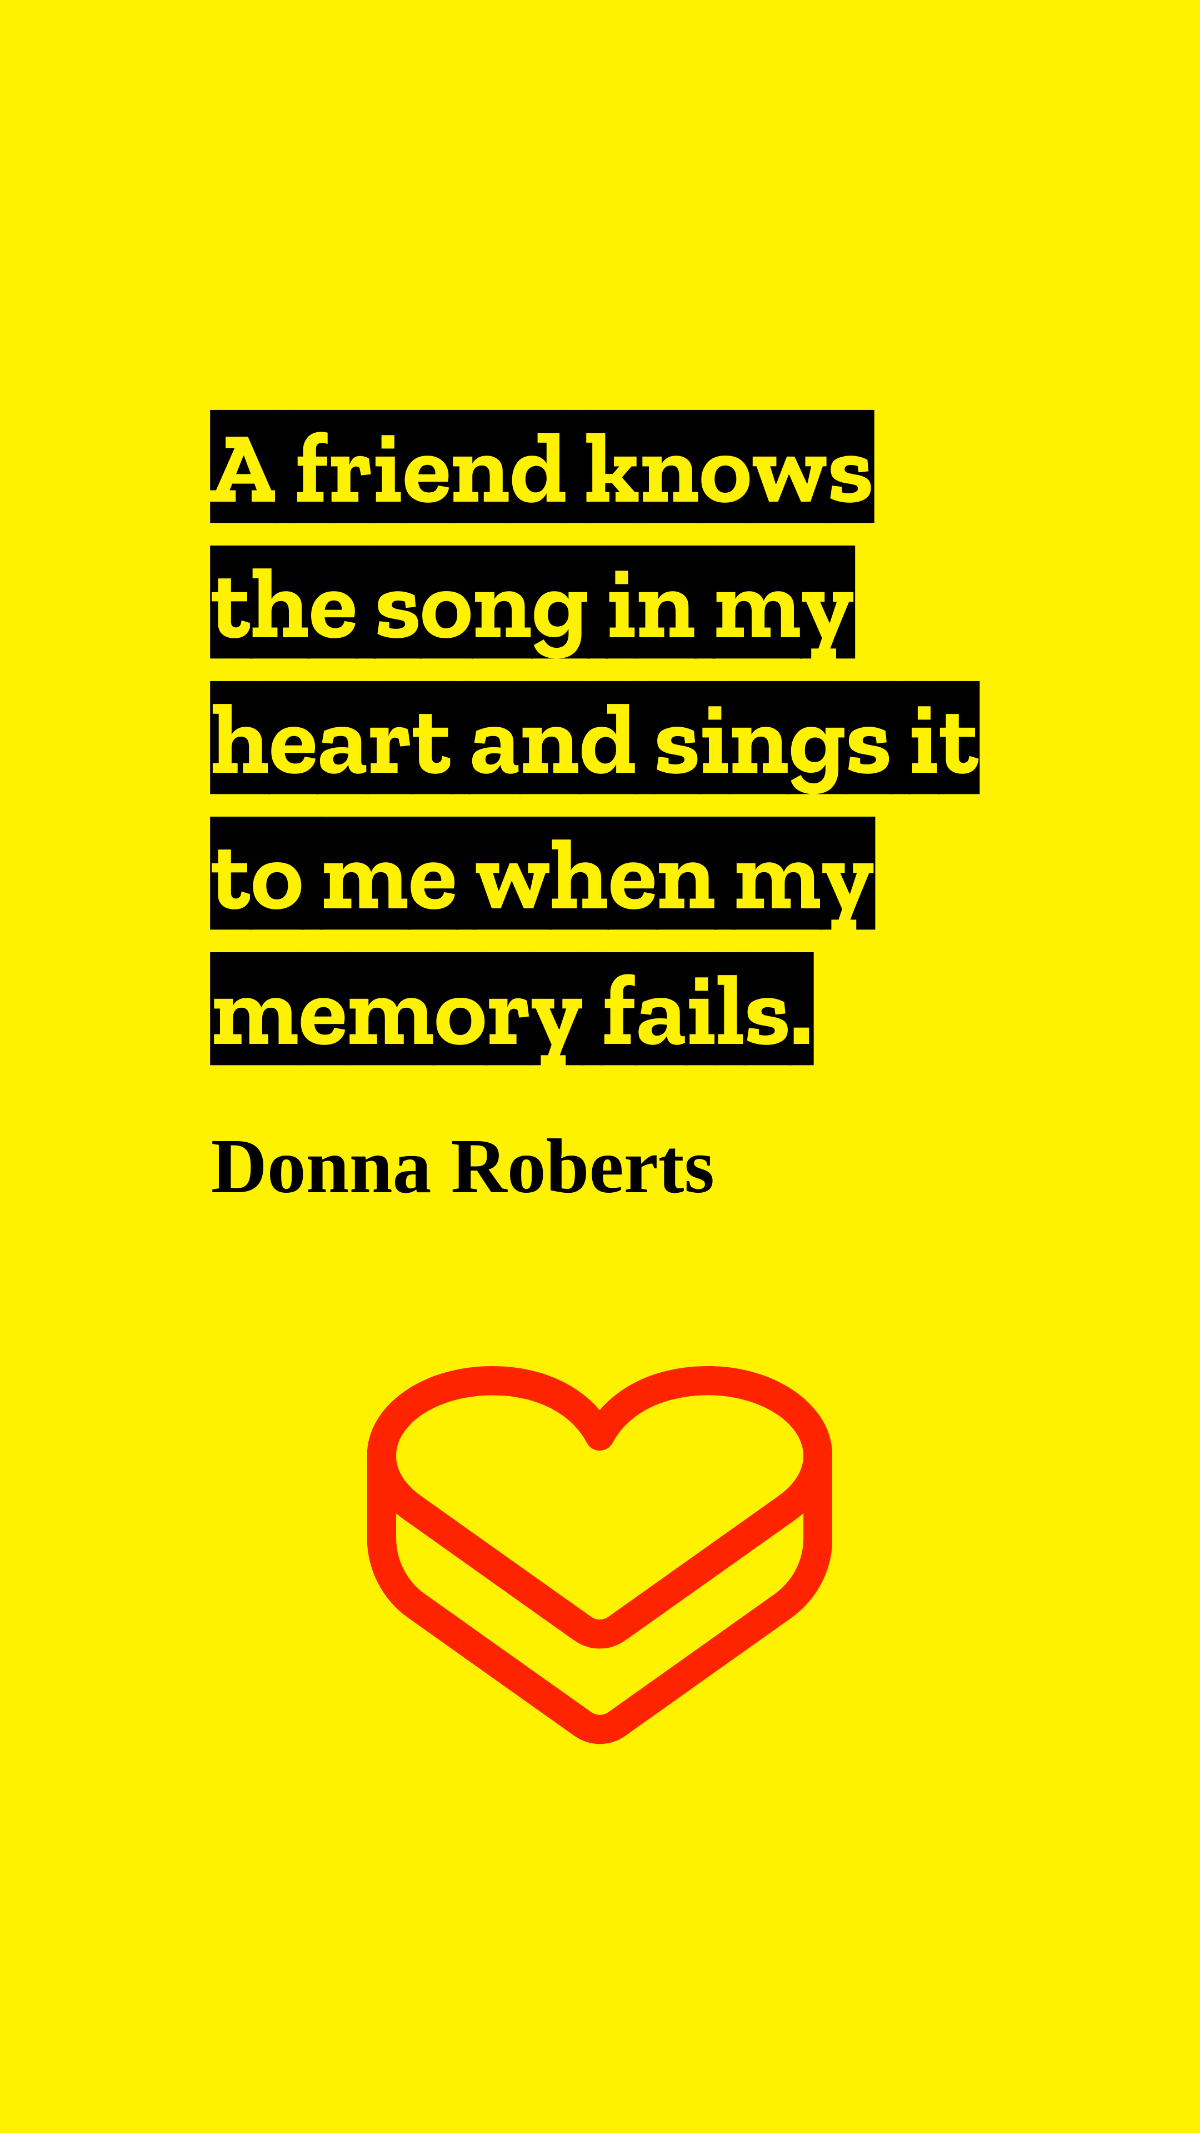 Donna Roberts - A friend knows the song in my heart and sings it to me when my memory fails. Template